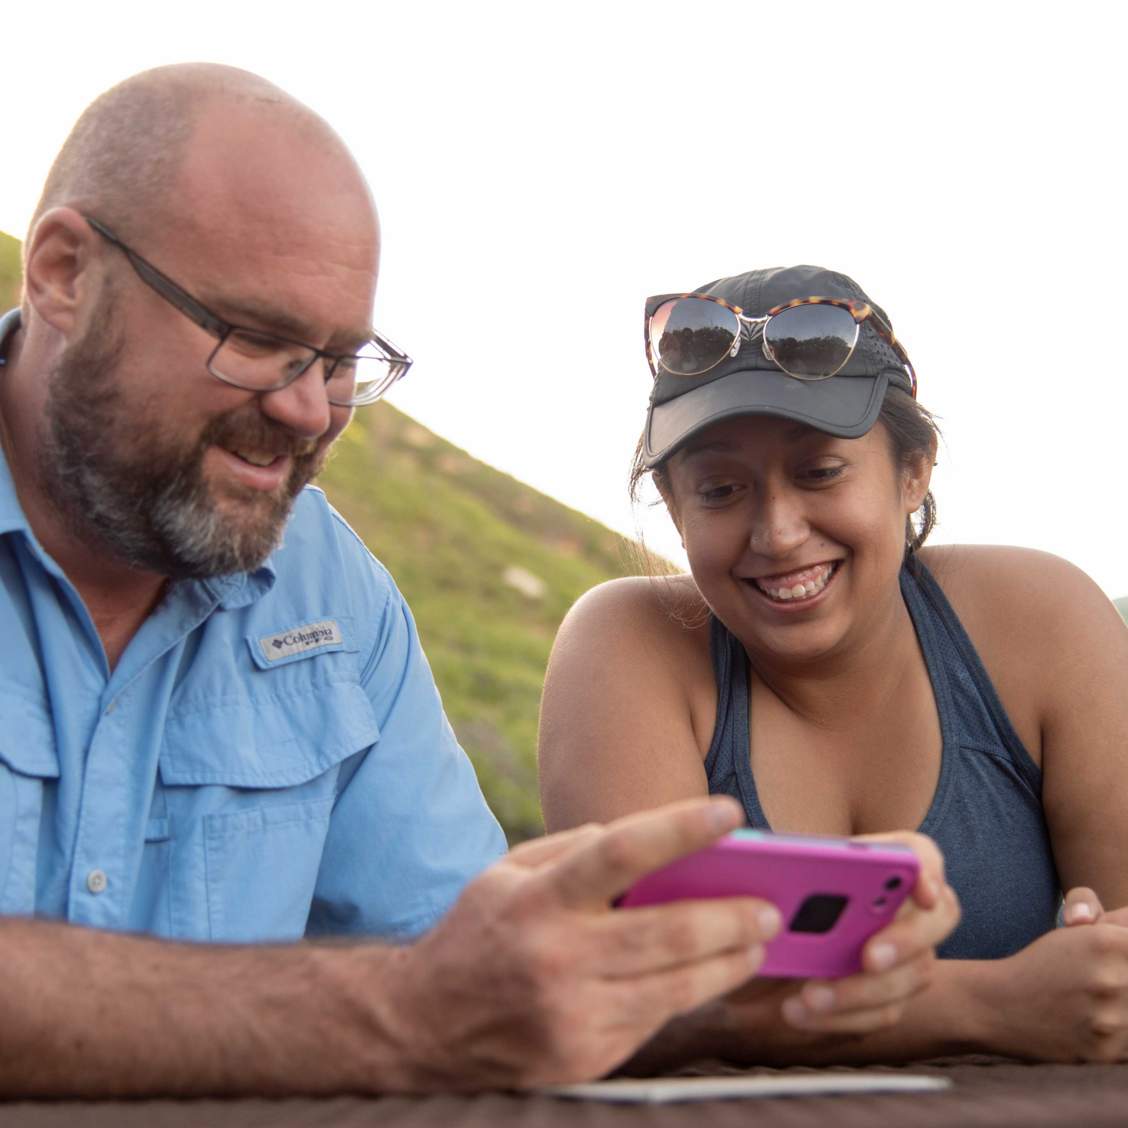 Student and professor sit together, reviewing images on a phone